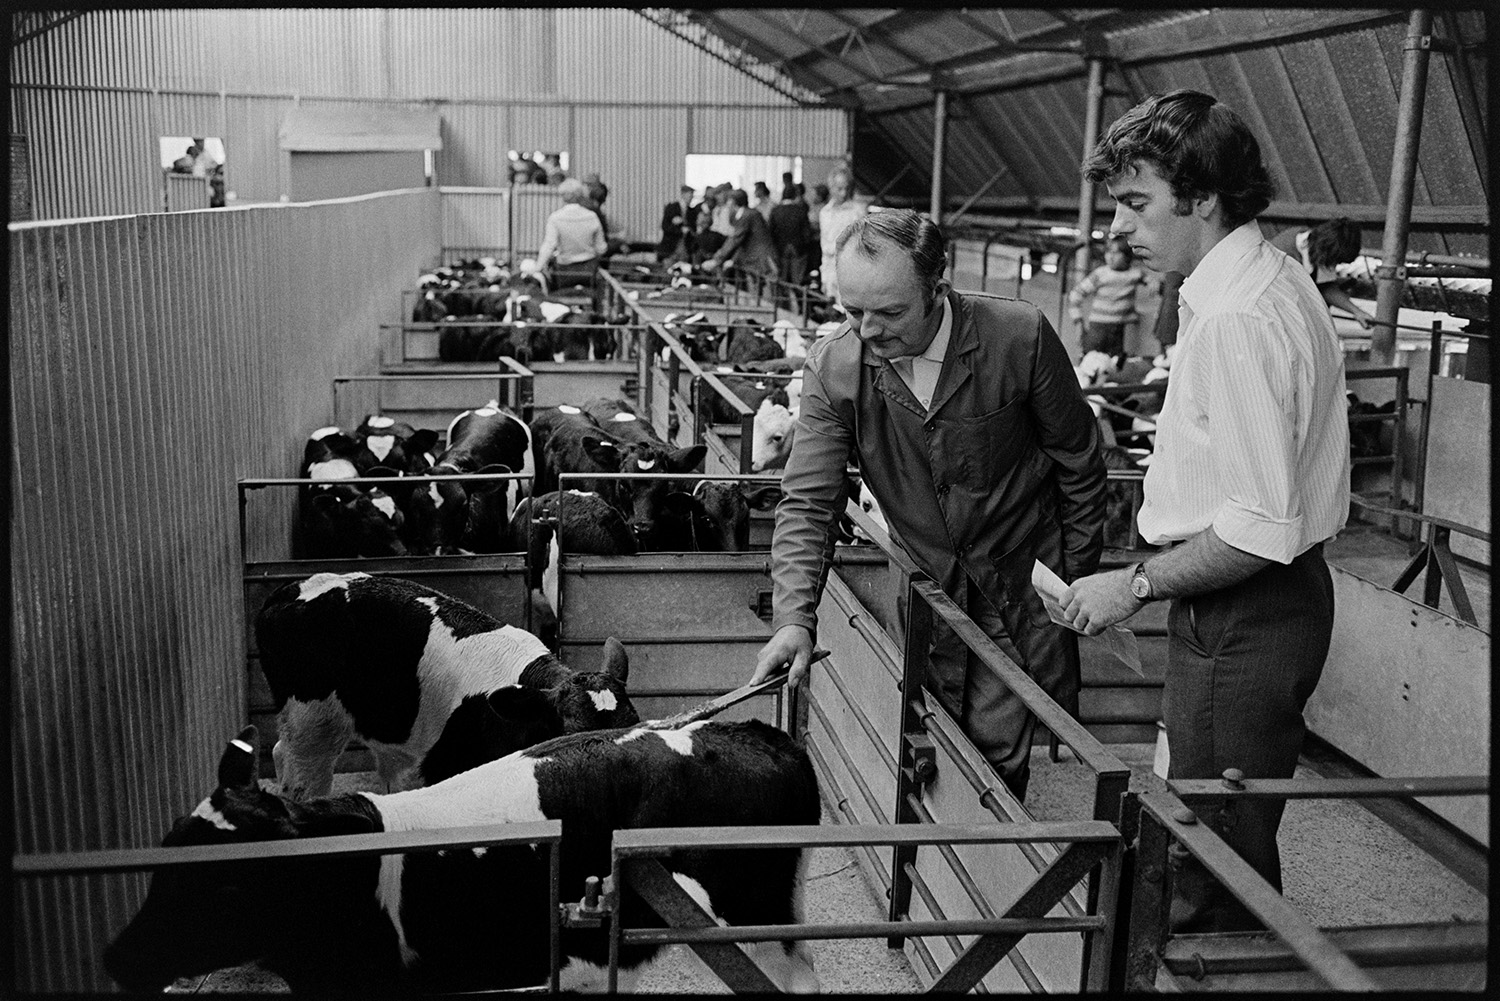 Taking calves to market in pickup van, calves in pens and Auctioneer. 
[Graham Ward talking to another man about two calves in a pen at Hatherleigh Market. Other people and calves can be seen in the background.]